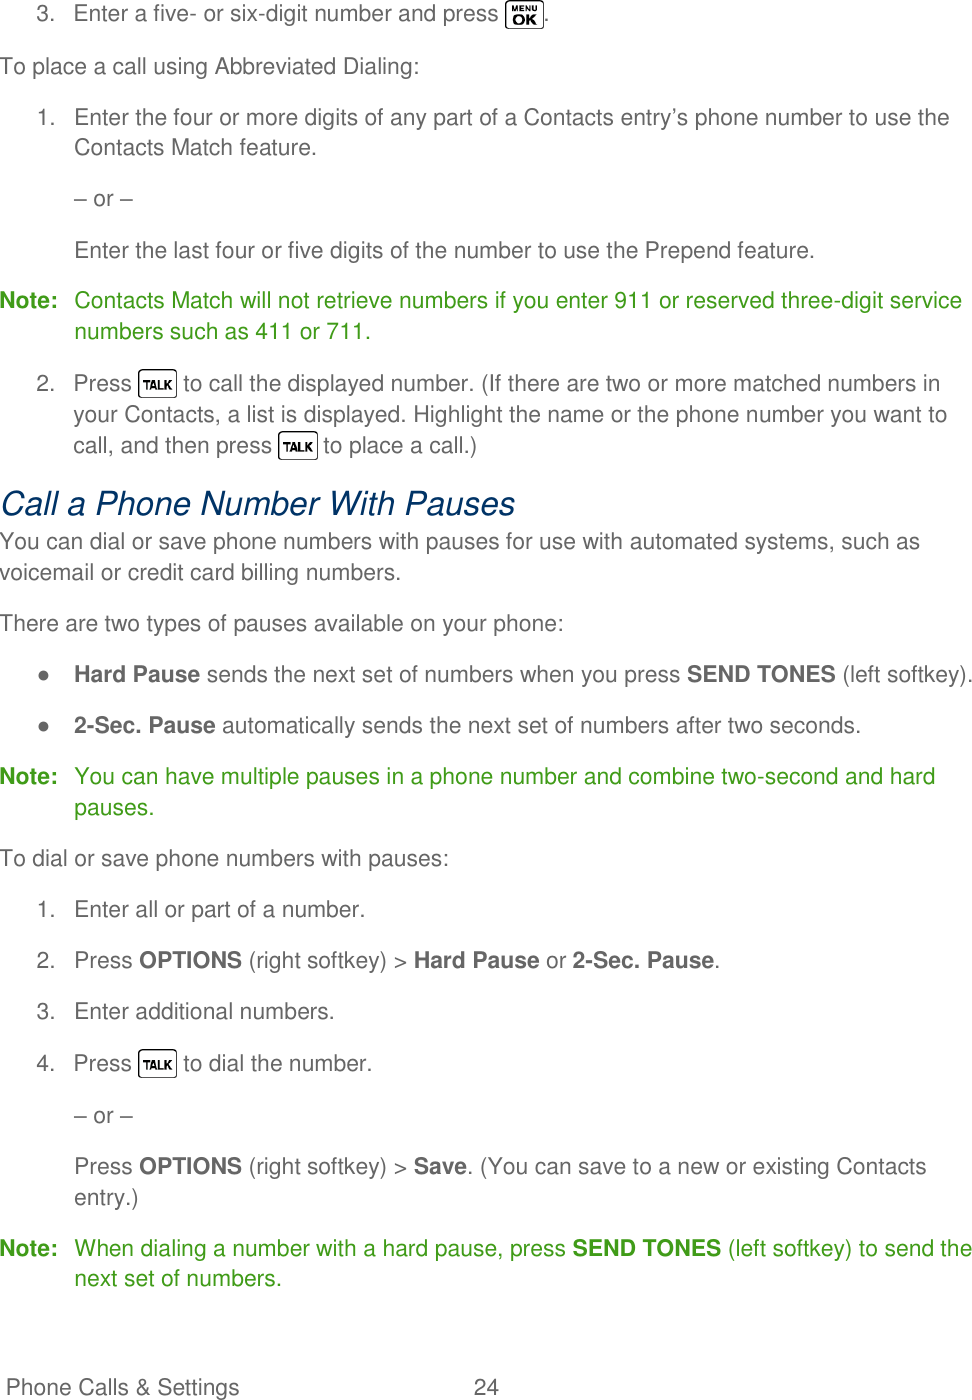   Phone Calls &amp; Settings  24   3.  Enter a five- or six-digit number and press  . To place a call using Abbreviated Dialing: 1.  Enter the four or more digits of any part of a Contacts entry‘s phone number to use the Contacts Match feature. – or – Enter the last four or five digits of the number to use the Prepend feature. Note:  Contacts Match will not retrieve numbers if you enter 911 or reserved three-digit service numbers such as 411 or 711. 2.  Press   to call the displayed number. (If there are two or more matched numbers in your Contacts, a list is displayed. Highlight the name or the phone number you want to call, and then press   to place a call.) Call a Phone Number With Pauses You can dial or save phone numbers with pauses for use with automated systems, such as voicemail or credit card billing numbers. There are two types of pauses available on your phone: ● Hard Pause sends the next set of numbers when you press SEND TONES (left softkey). ● 2-Sec. Pause automatically sends the next set of numbers after two seconds. Note:  You can have multiple pauses in a phone number and combine two-second and hard pauses. To dial or save phone numbers with pauses: 1.  Enter all or part of a number. 2.  Press OPTIONS (right softkey) &gt; Hard Pause or 2-Sec. Pause. 3.  Enter additional numbers. 4.  Press   to dial the number. – or – Press OPTIONS (right softkey) &gt; Save. (You can save to a new or existing Contacts entry.) Note:  When dialing a number with a hard pause, press SEND TONES (left softkey) to send the next set of numbers. 